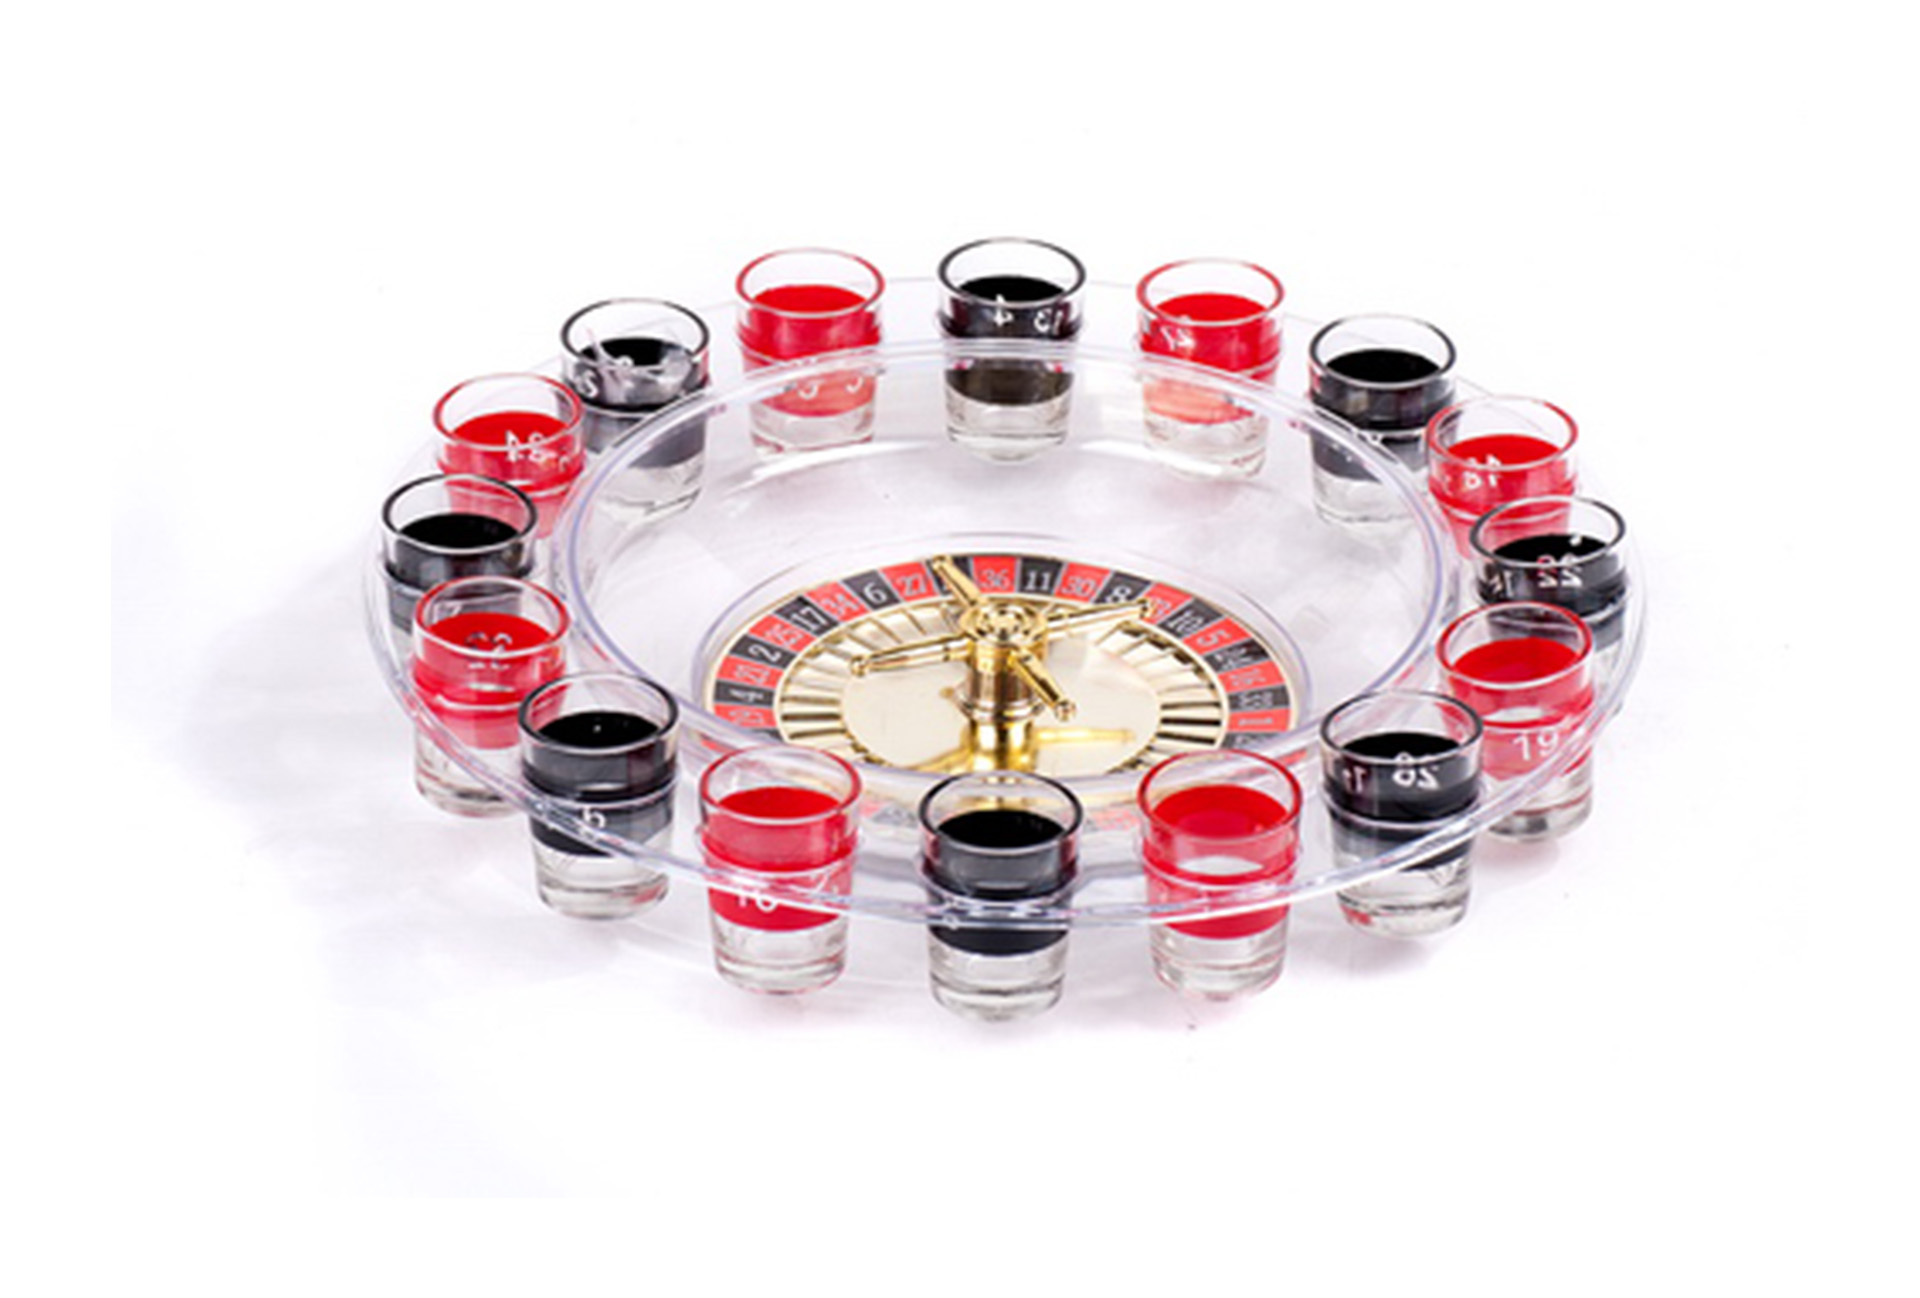 DK1211A DRINKING ROULETTE GAME